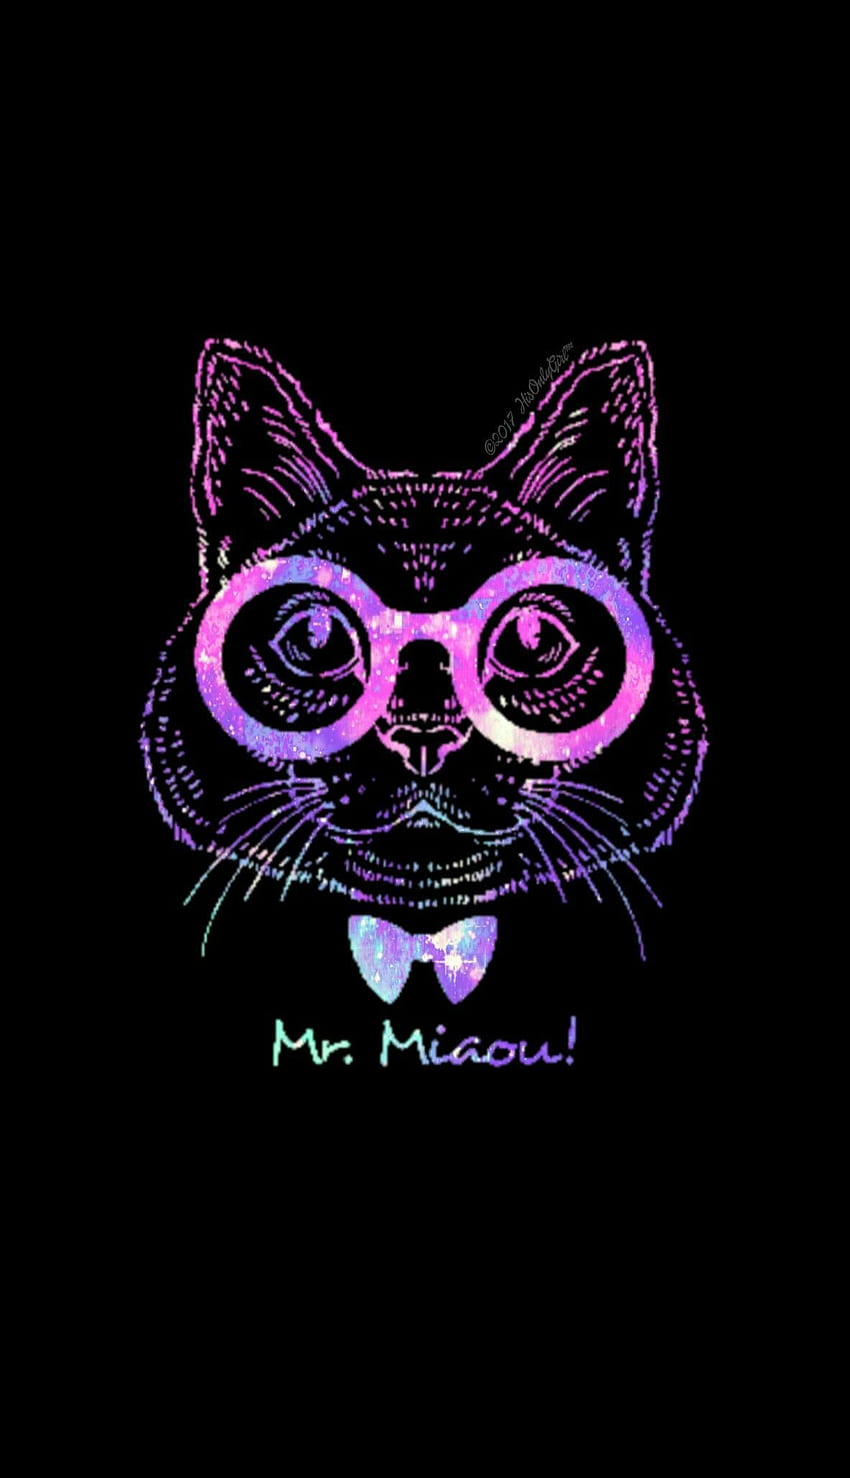 3840x2160px, 4K Free download | Mr Miaow kitty galaxy I created for the ...